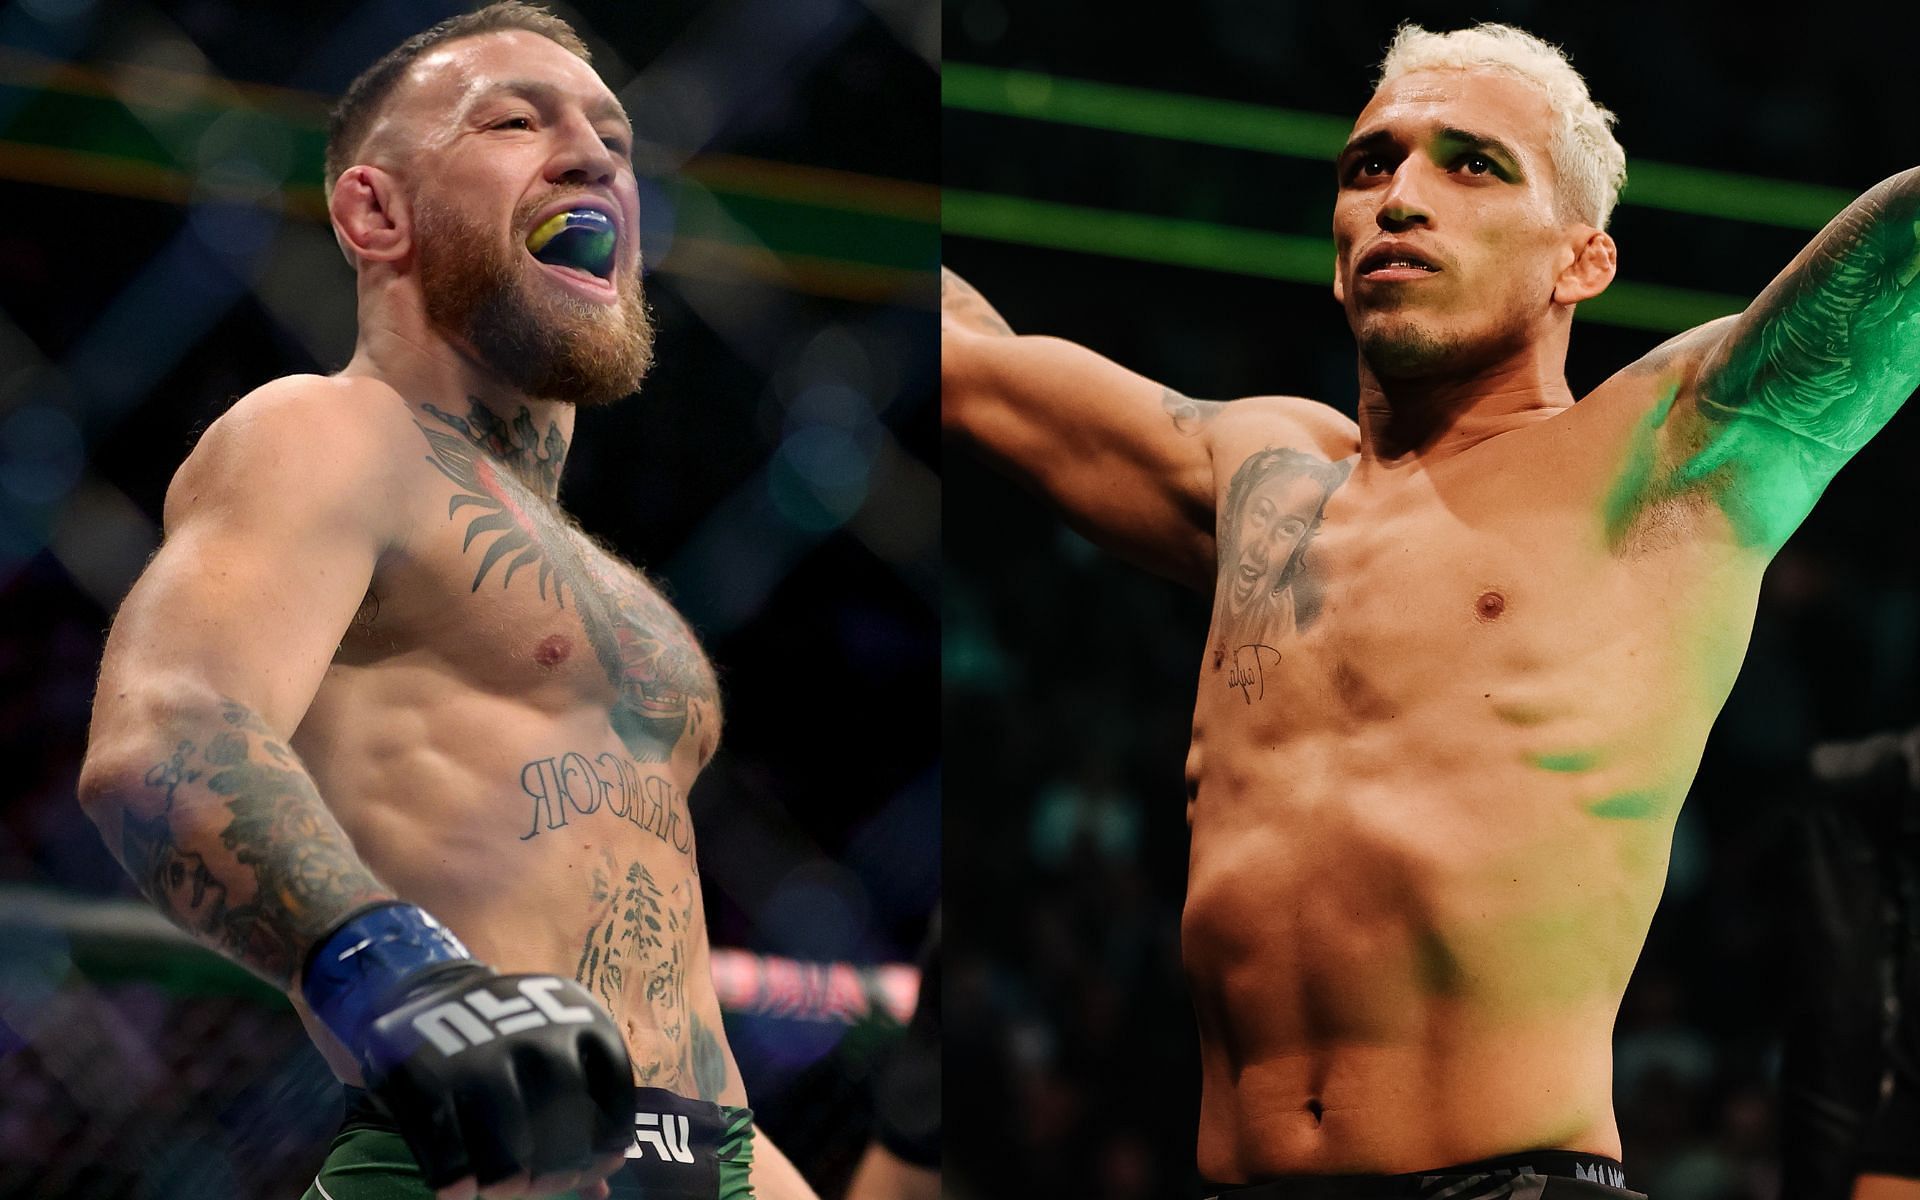 Conor McGregor (left), Charles Oliveira (right)